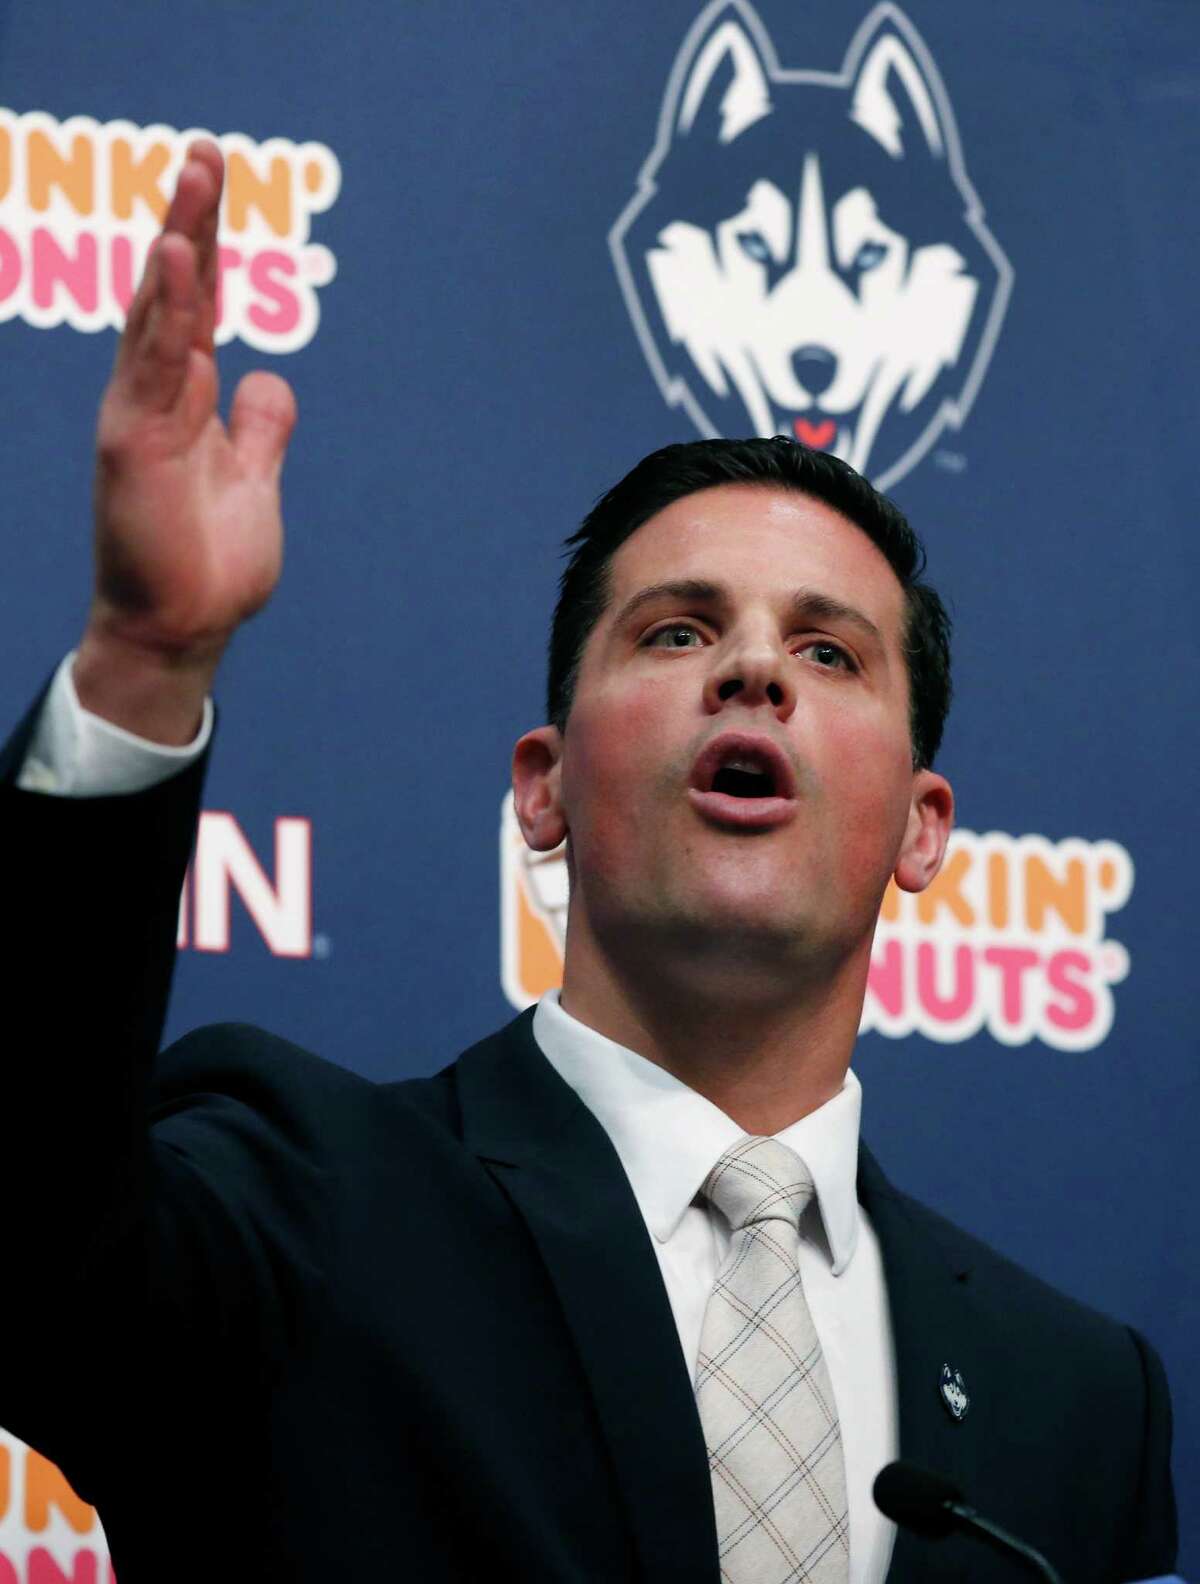 Bob Diaco, former Notre Dame defensive coordinator, speaks as Connecticut's new head football coach during an introductory news conference on campus in Storrs, Conn., Thursday, Dec. 12, 2013. (AP Photo/Elise Amendola)